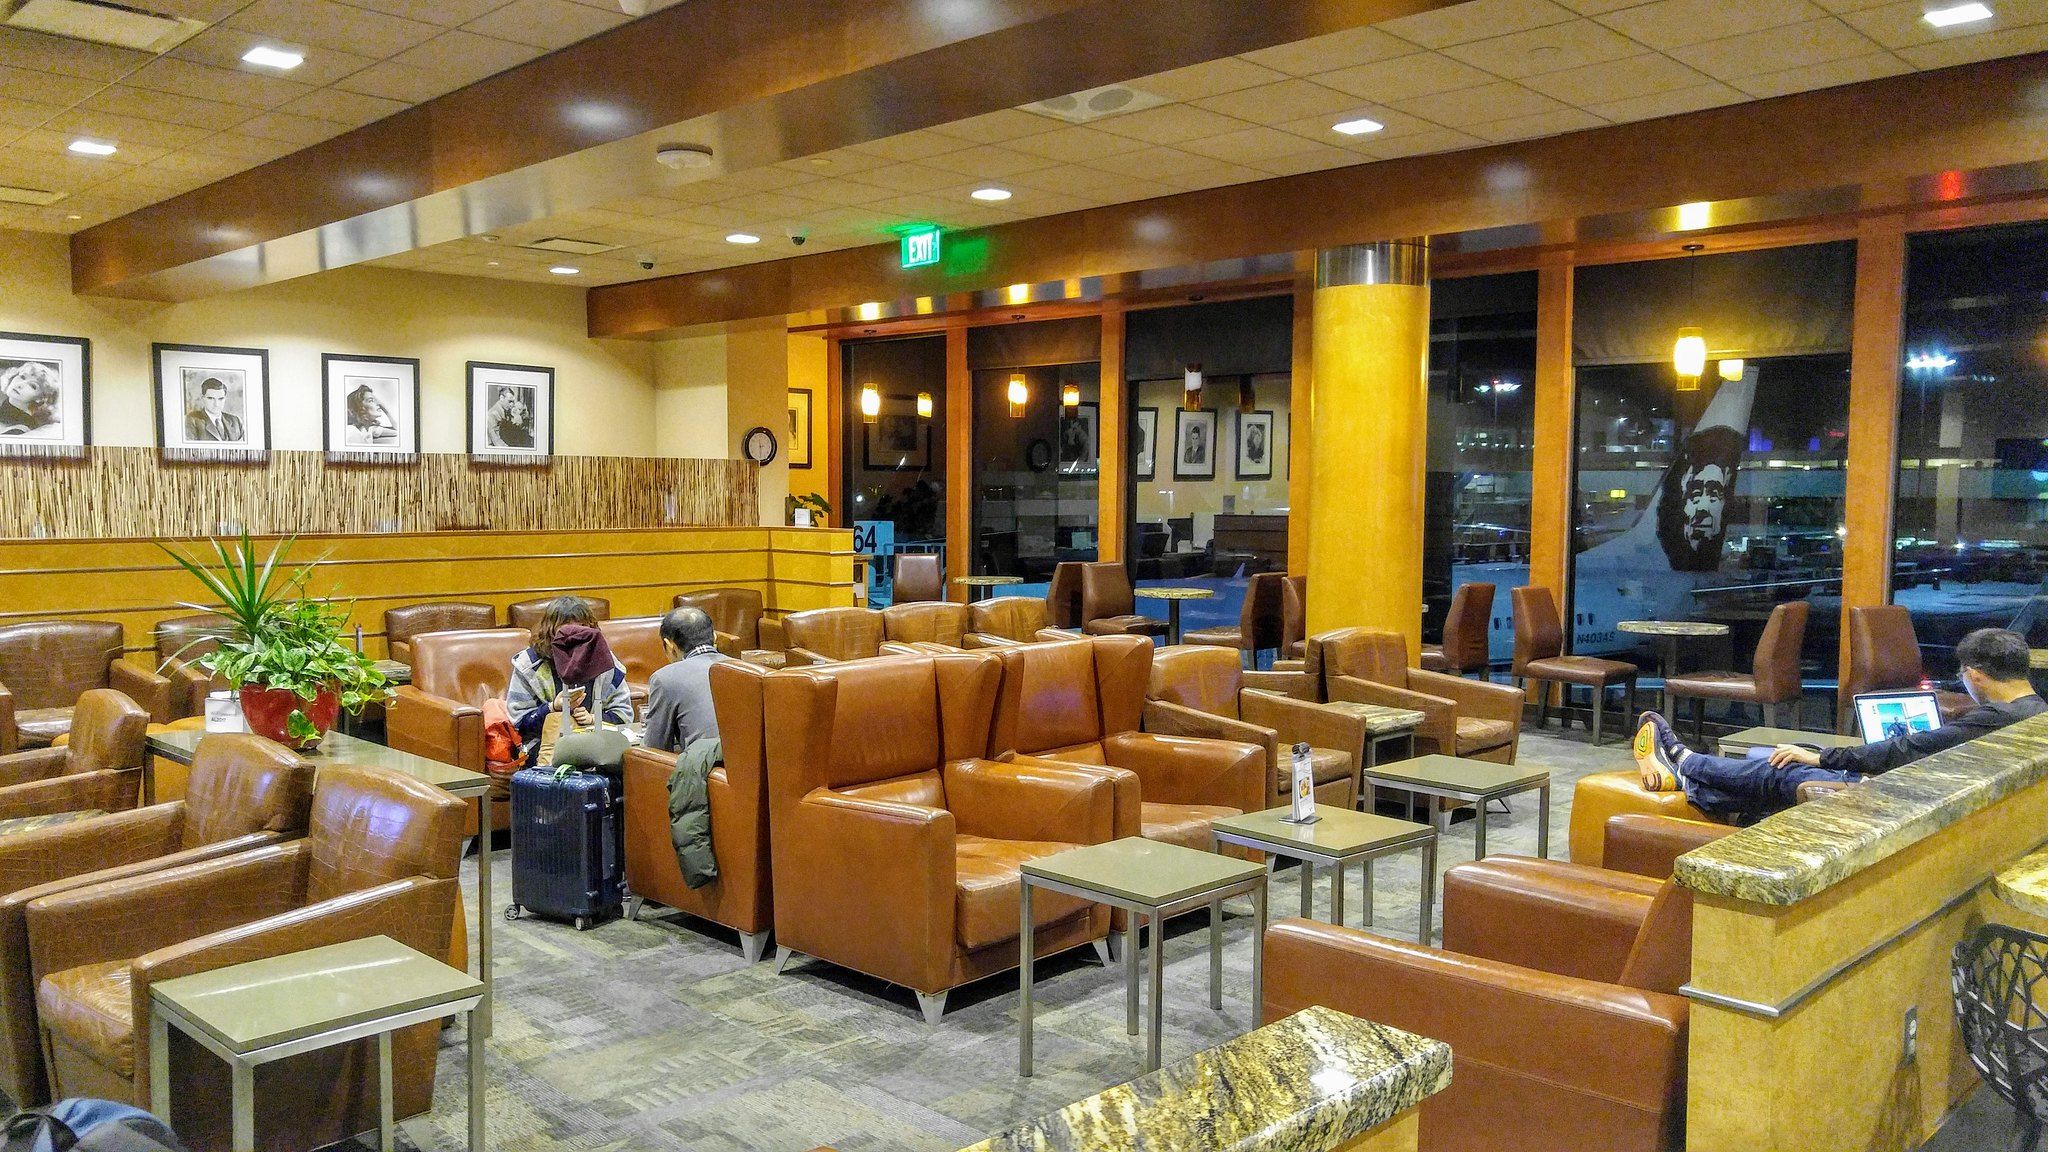 Alaska Airlines lounge at LAX.